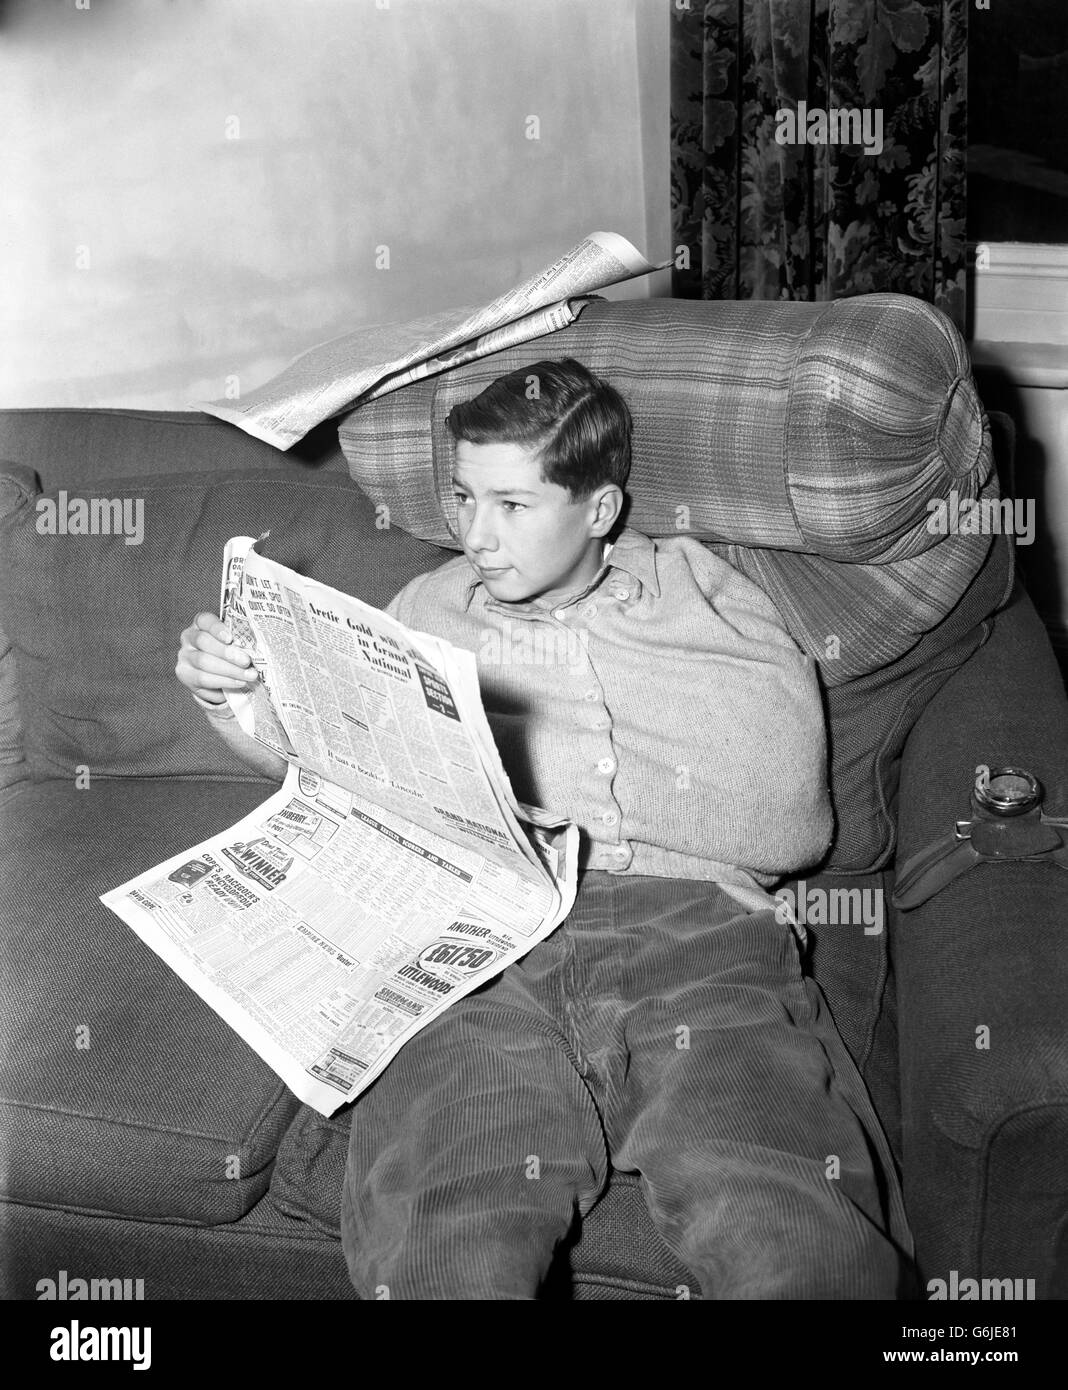 Seeing his accidents as others saw it is 15-year-old jockey LESTER PIGGOTT, pictured at home in Lambourn, Berkshire, as he reads an account of the mishap at Lincoln Races yesterday in which his collar bone was broken and his hopes for the Lincolnshire Handicap shattered. Piggott was thrown when his mount, Pandite, fell about 50 yards from the post when lying third in the first race. Second Out, his mount in the Lincolnshire - run an hour and a quarter later - had to be ridden by another jockey. Piggott is expected to resume riding in a fortnight. Stock Photo